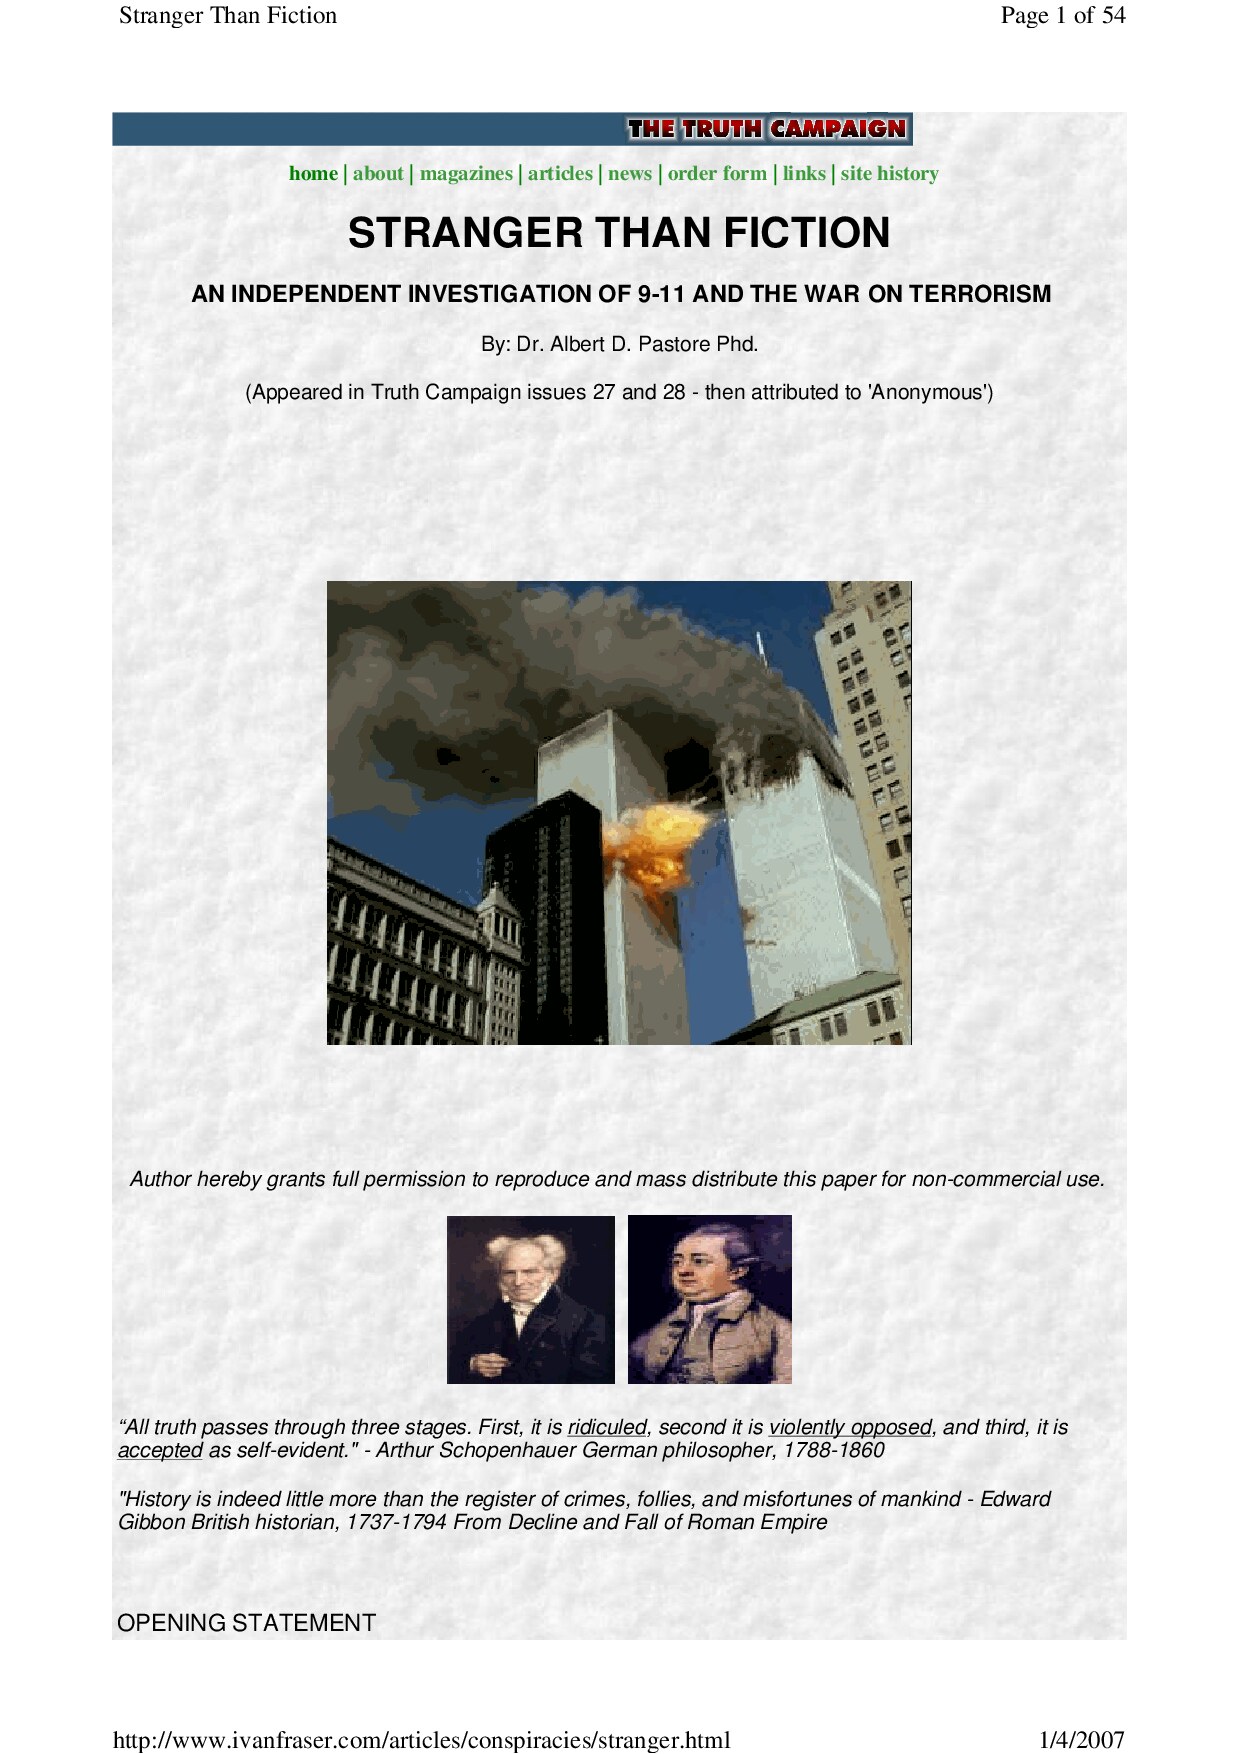 Pastore, Albert D. Stranger Than Fiction; An Independent Investigation of 9-11 and the War on Terrorism